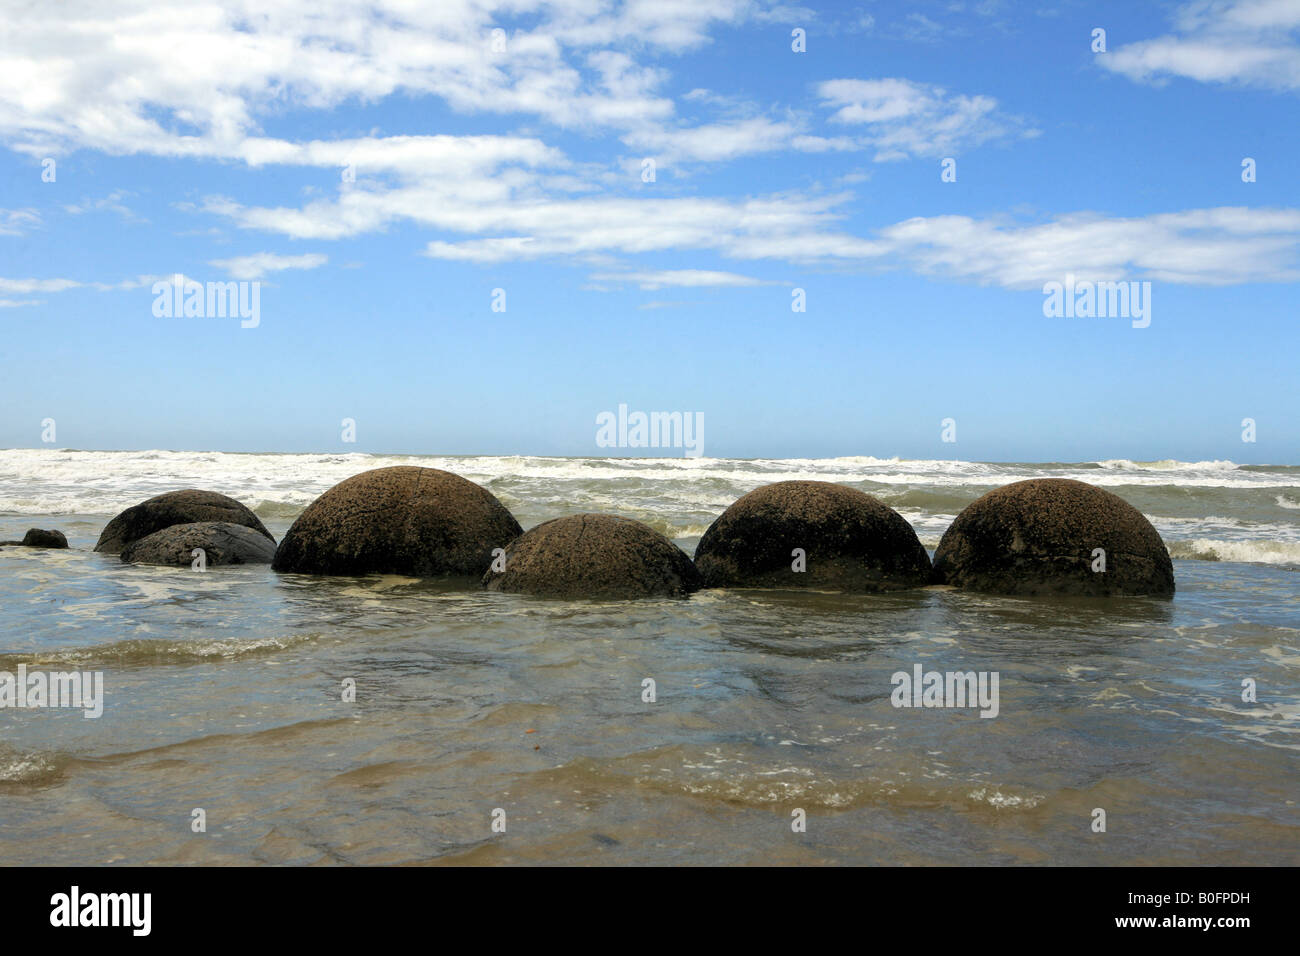 https://c8.alamy.com/comp/B0FPDH/a-60-million-year-old-giant-ball-shaped-boulder-on-the-beach-at-moeraki-B0FPDH.jpg